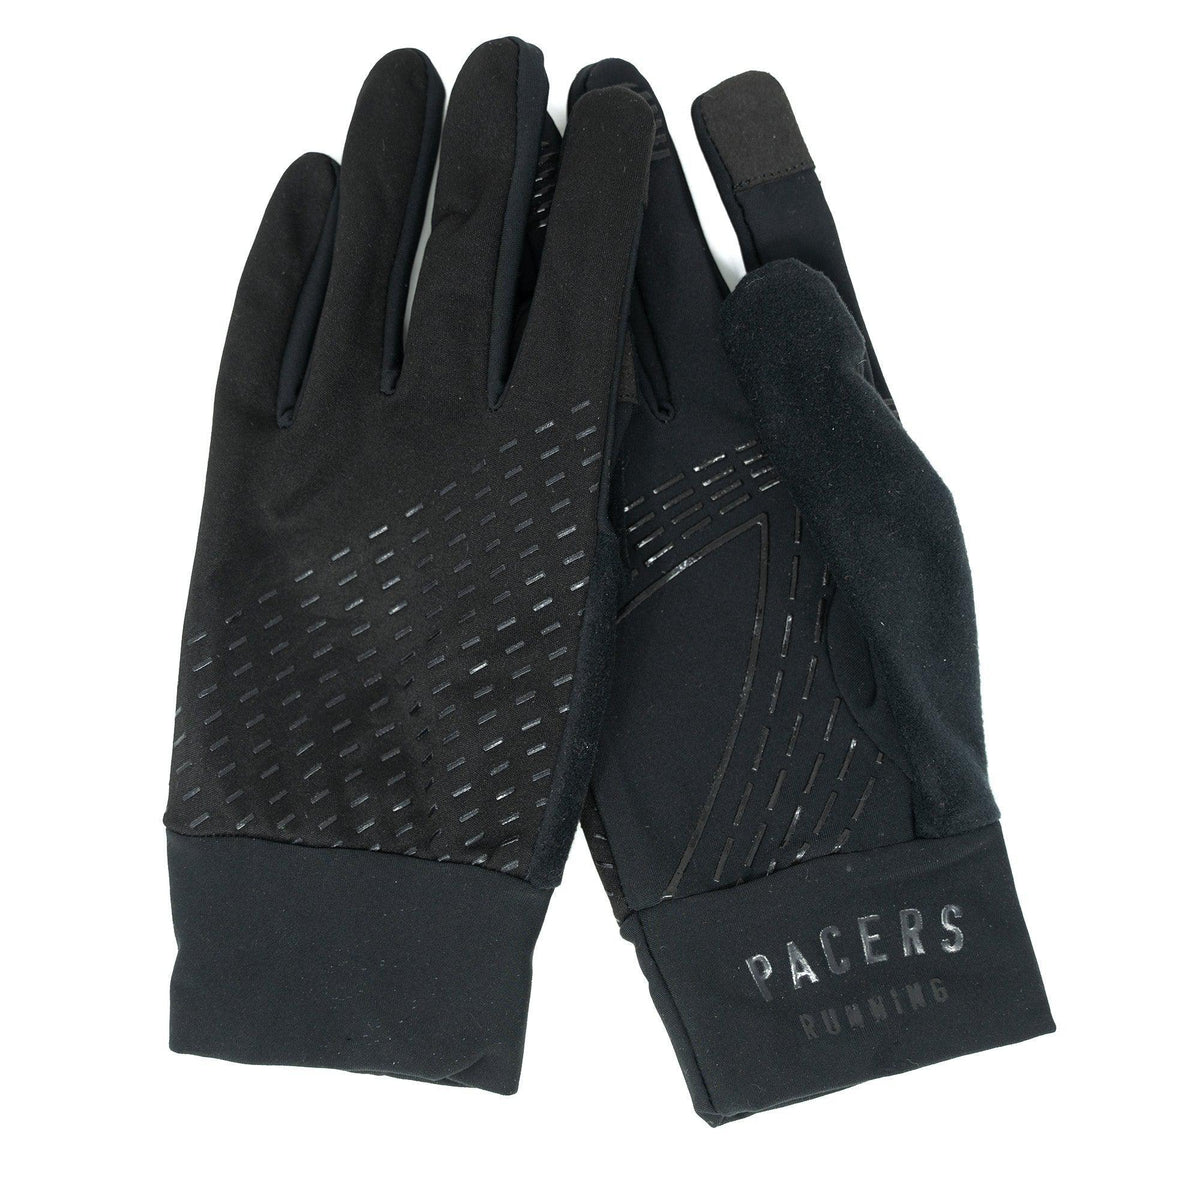 Pacers Running-2:02 Gloves - Pacers-S/M-Pacers Running